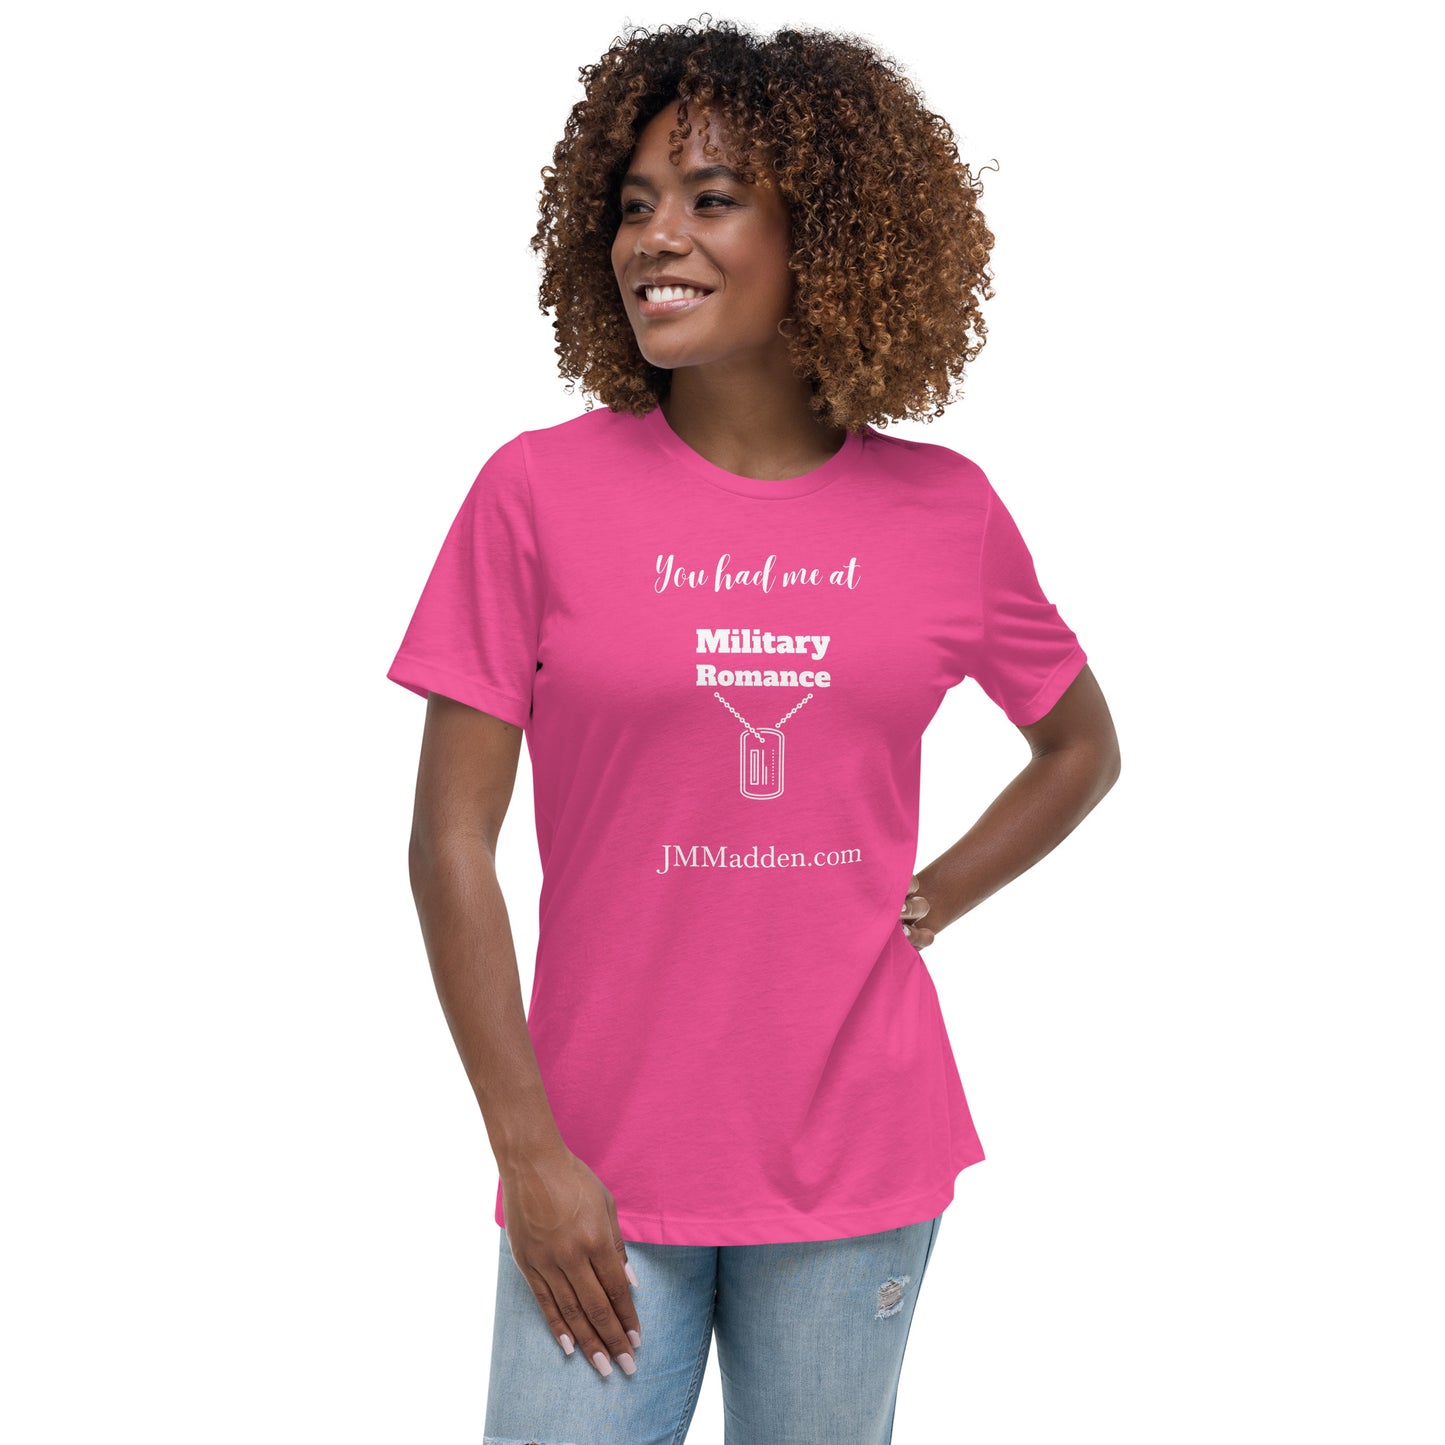 Women's Relaxed T-Shirt You had me at military romance, white lettering, author logo